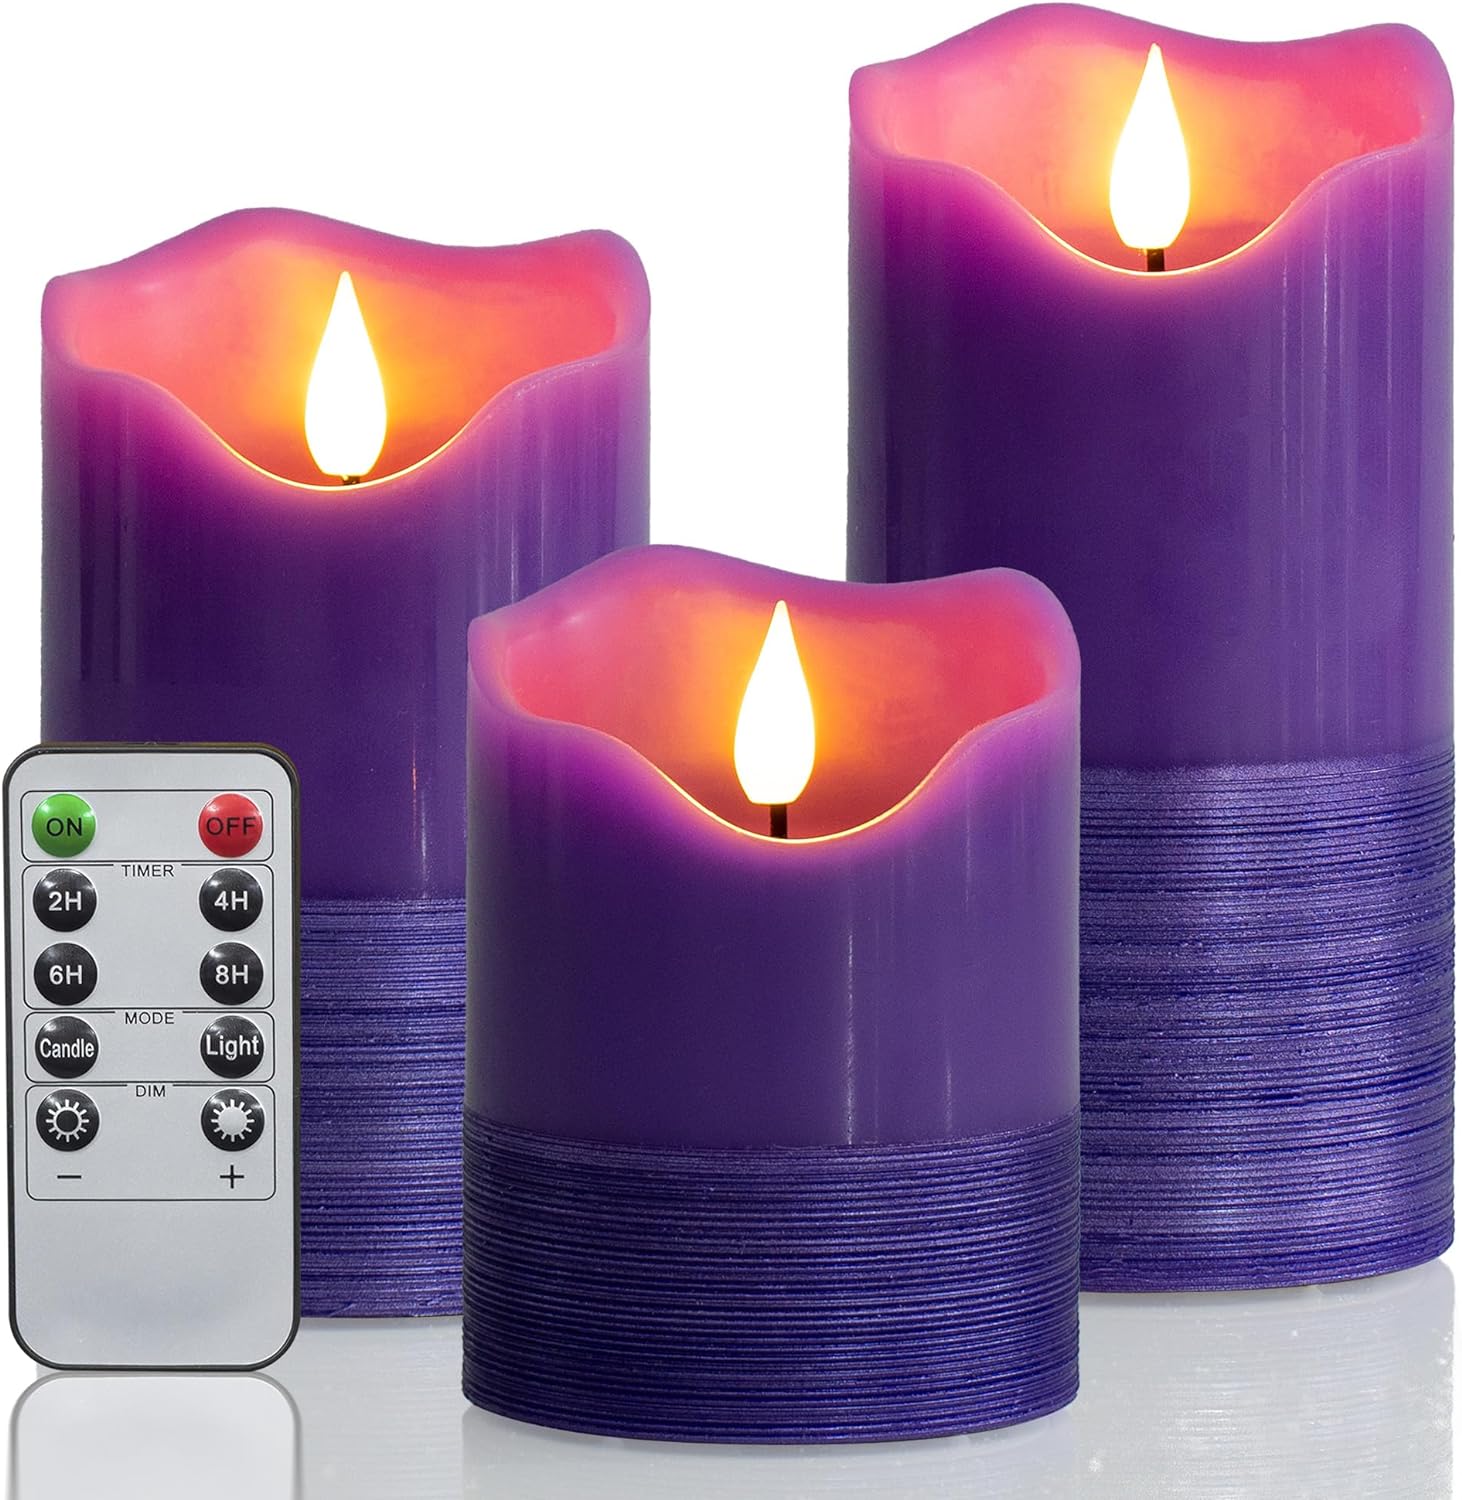 HN HAIINAA Purple Flameless Candles Battery Operated Halloween Real Wax LED Flickering Pillar Candles with Remote Set of 3 Indoor Halloween Window Table Decor(D3 H4 5 6)